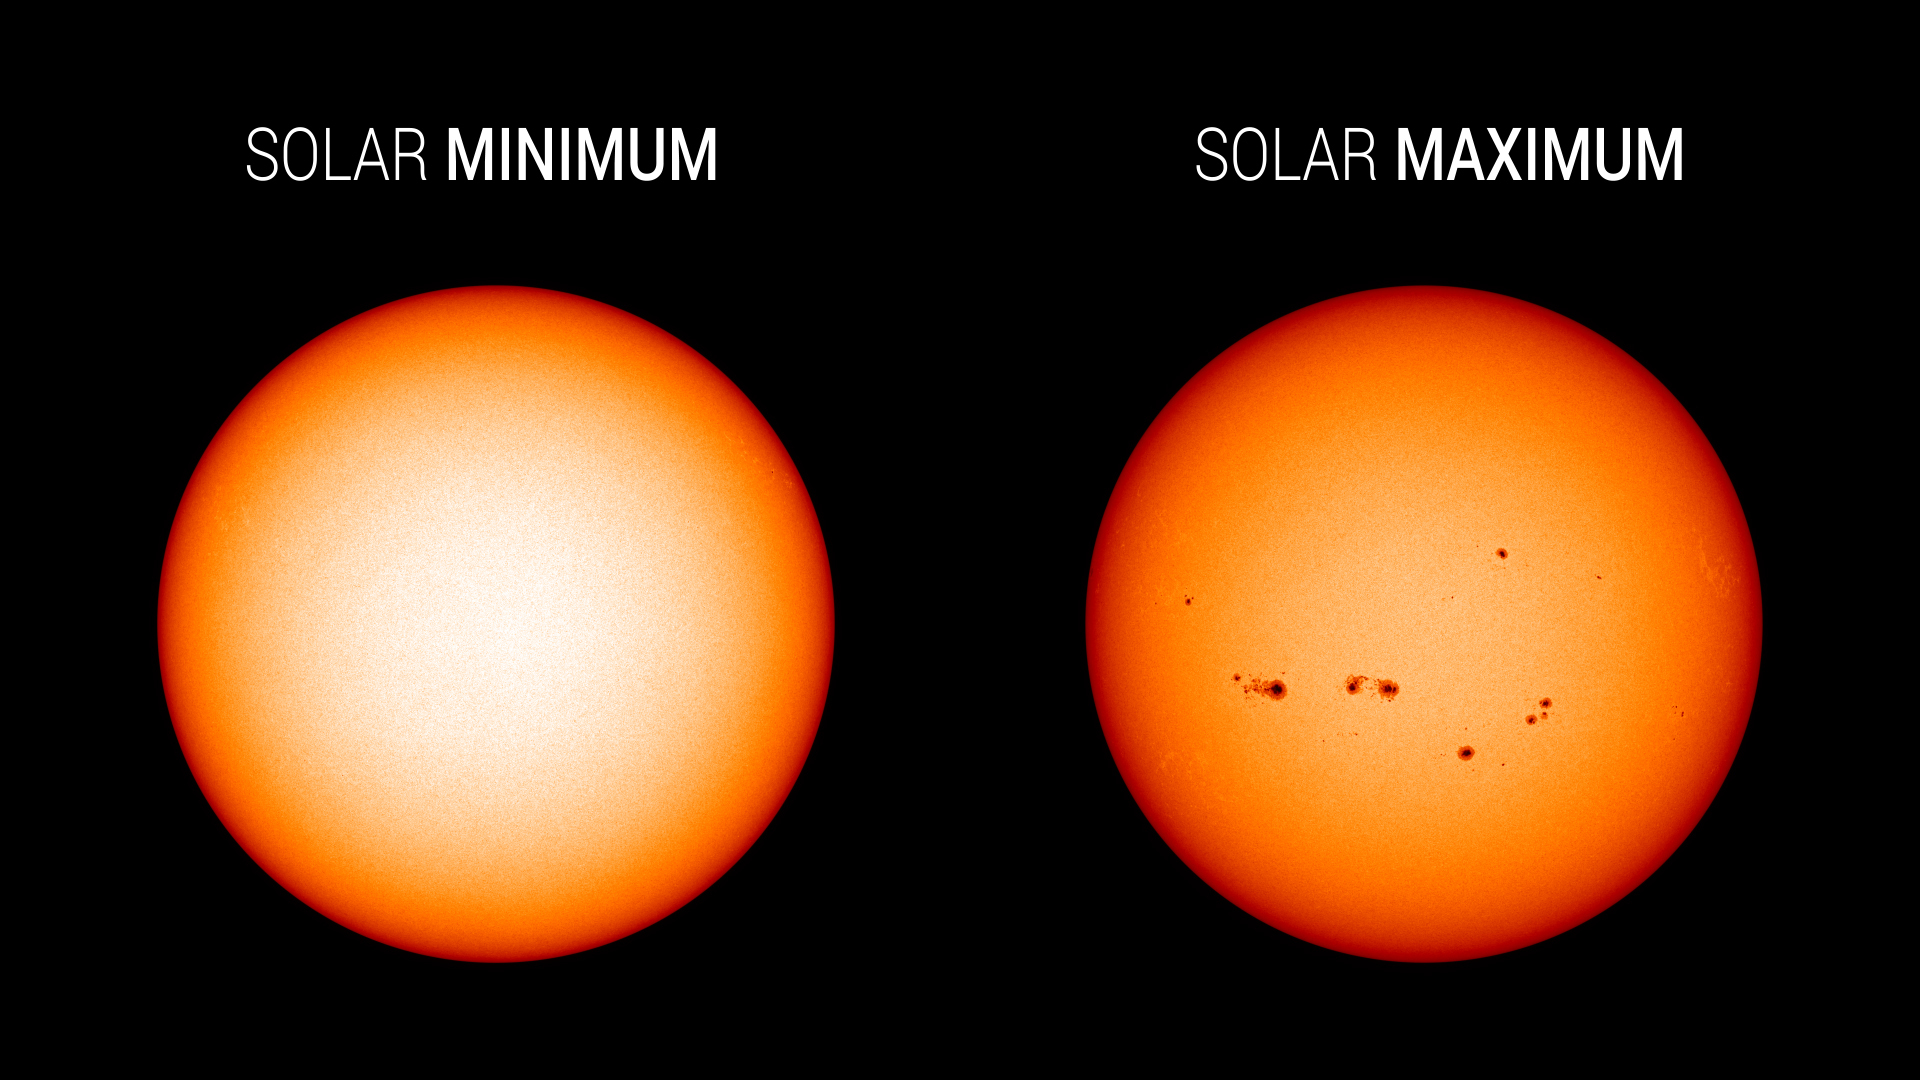 The Sun goes through regular cycles of approximately 11-years